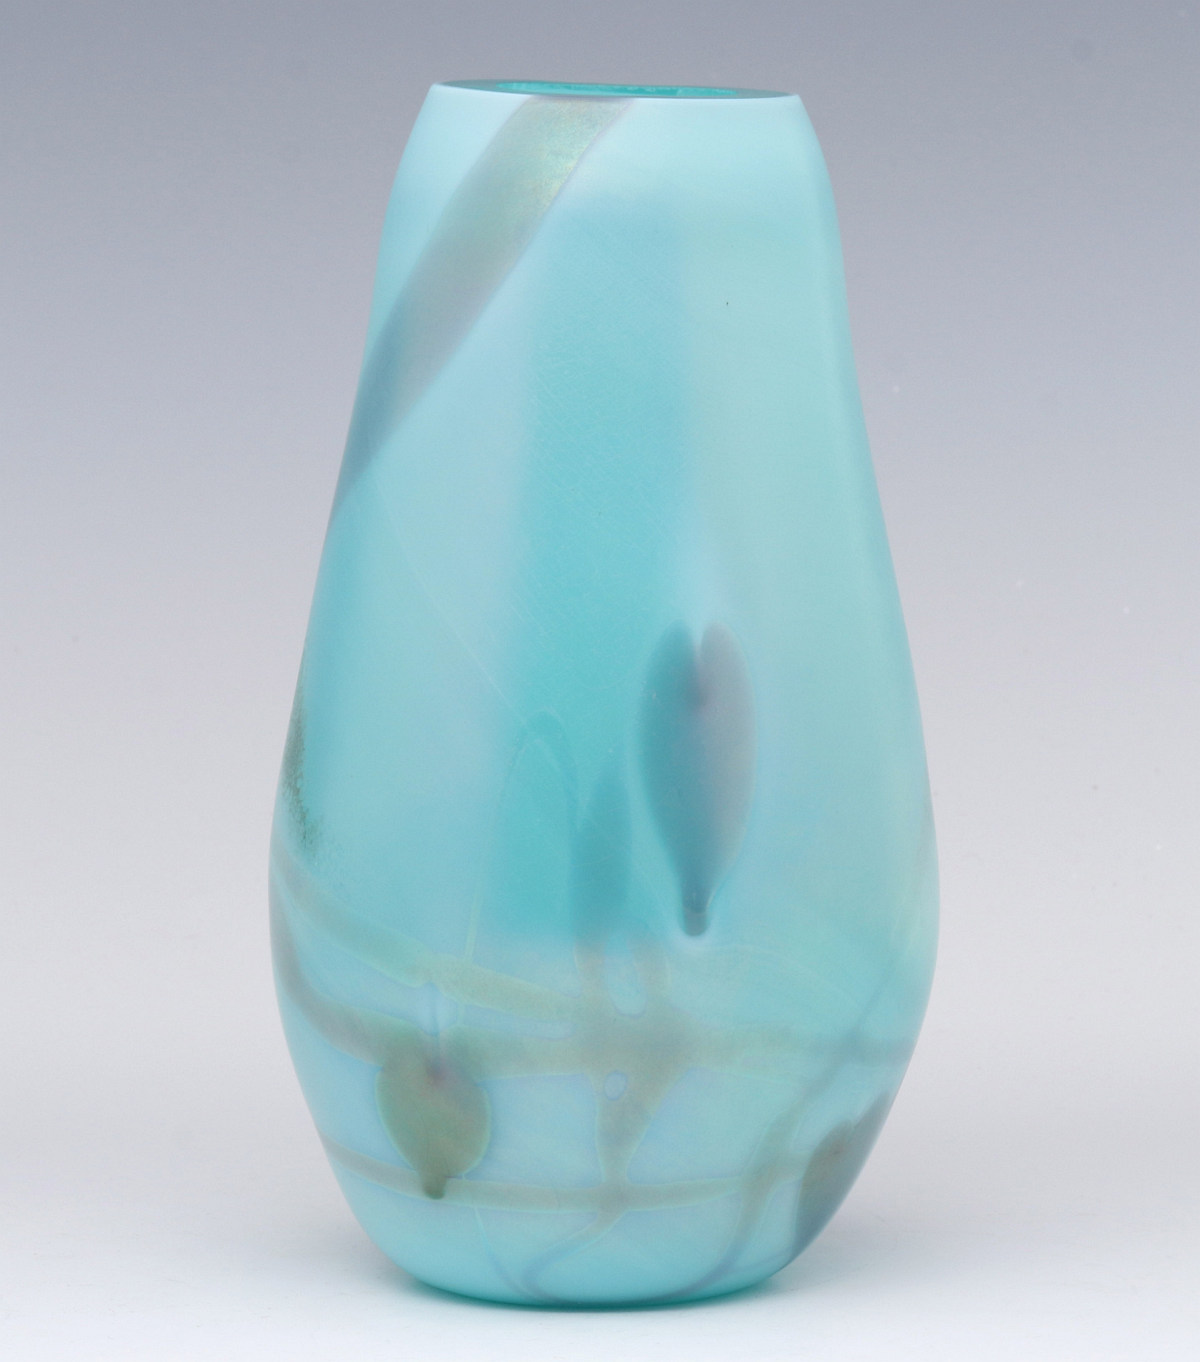 A NANCY FENTON ART GLASS VASE WITH HANGING HEARTS